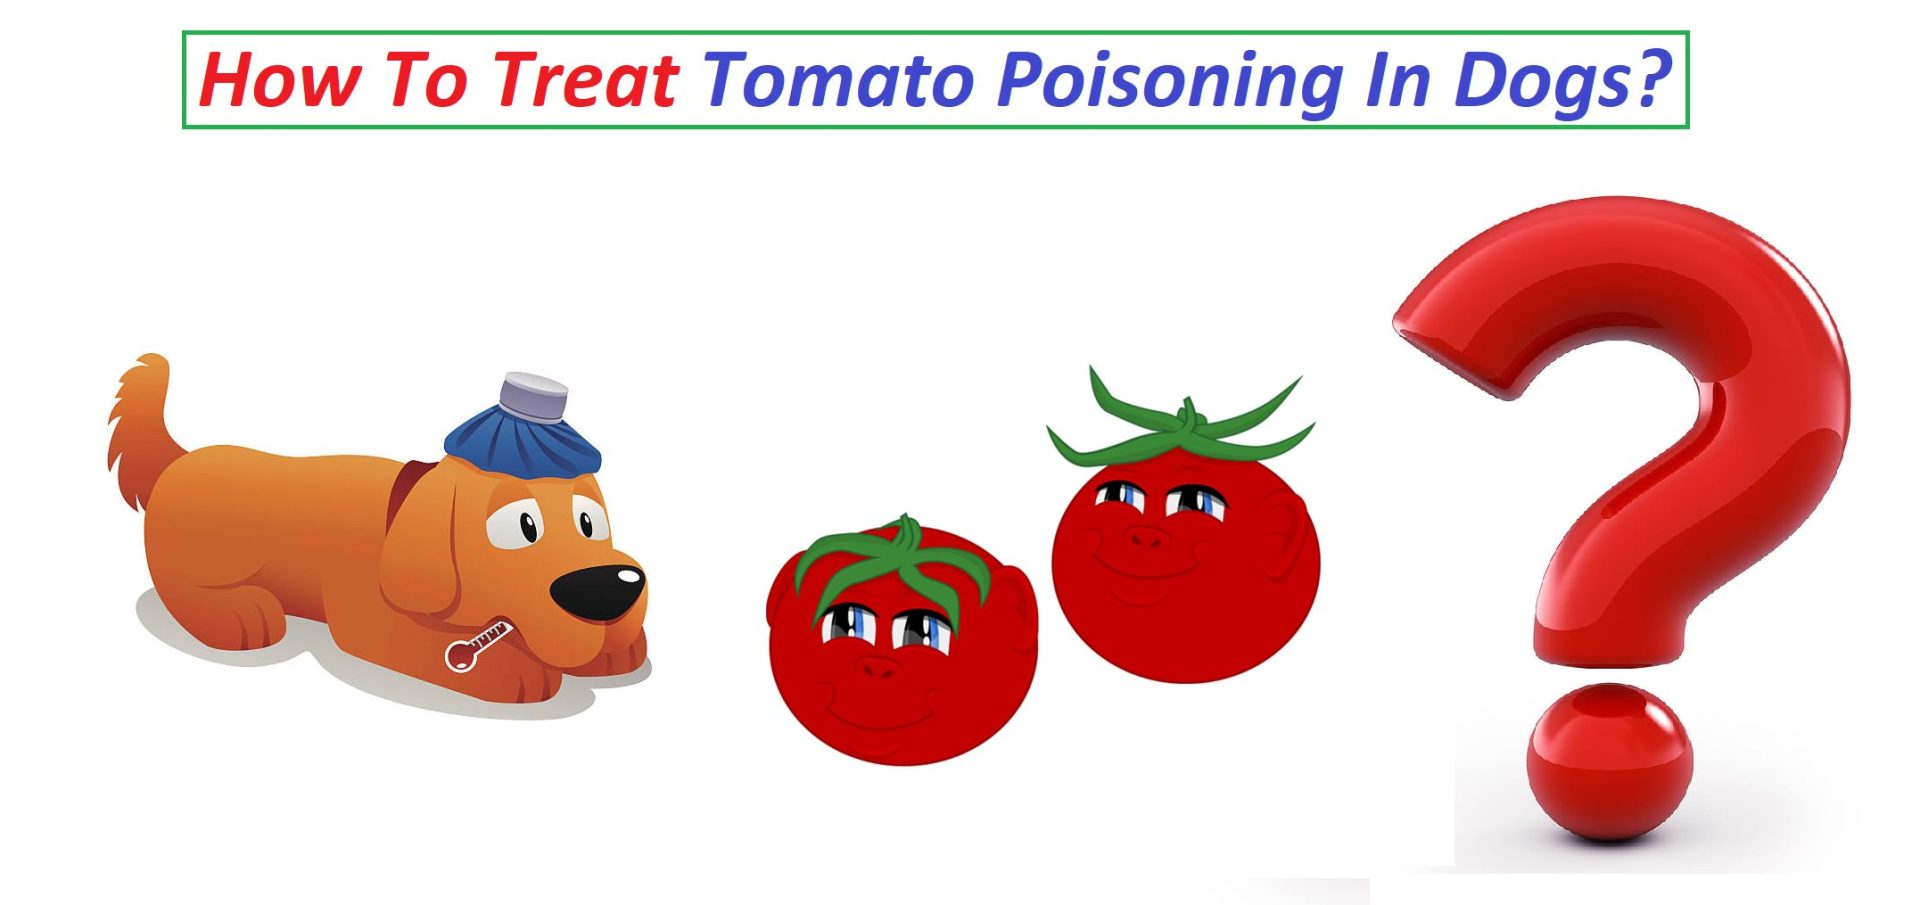 How To Treat Tomato Poisoning In Dogs?